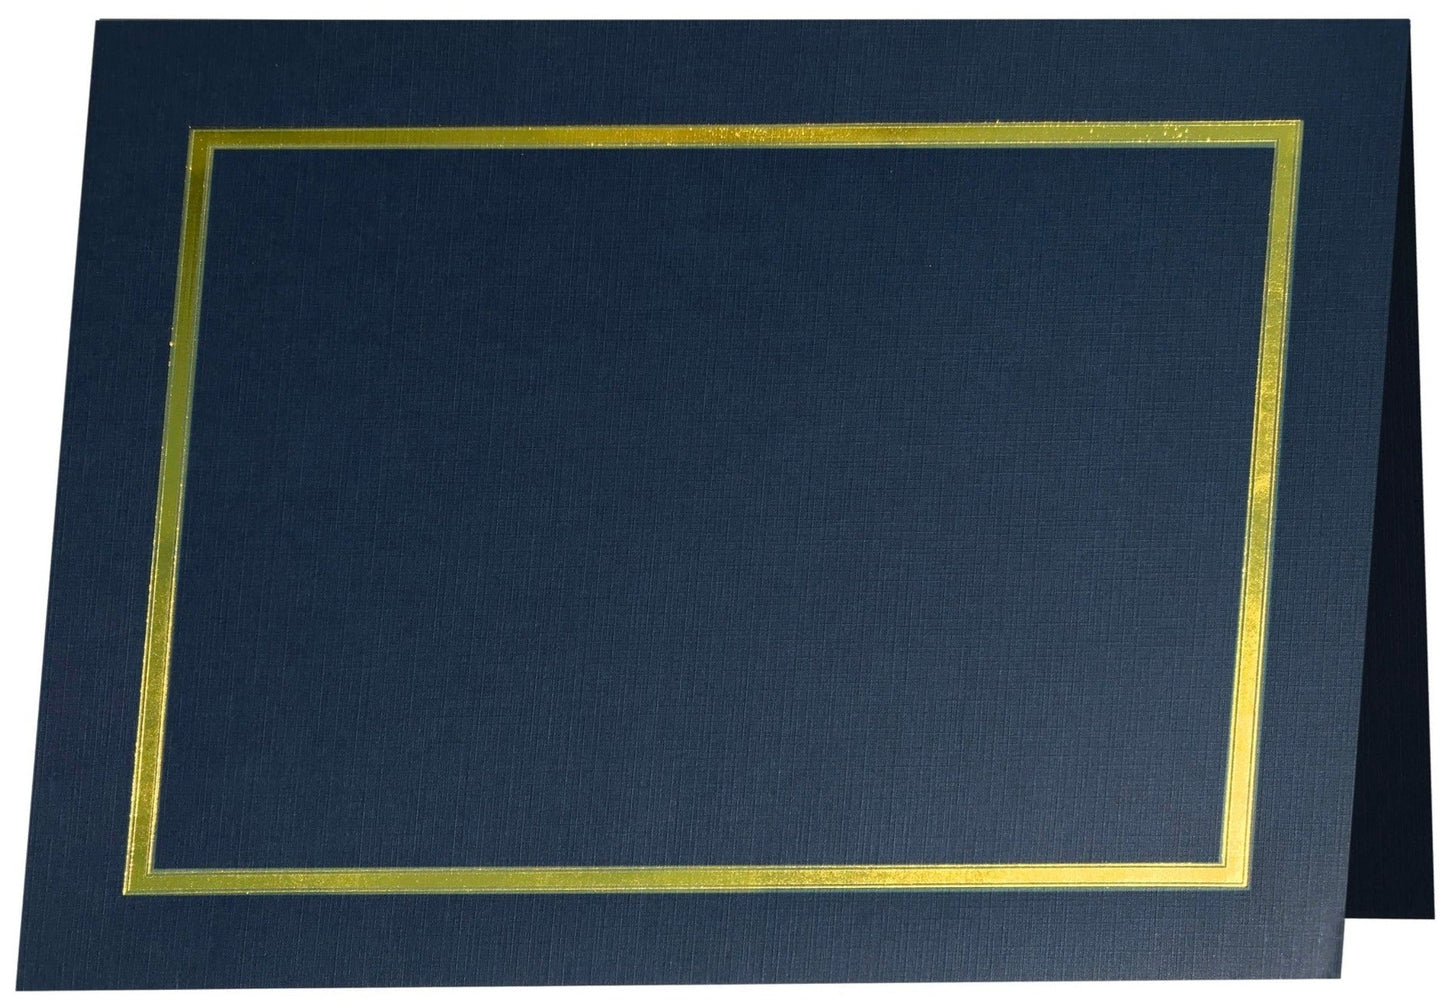 St. James® Elite™ Luxe Certificate Holders, Navy Linen with Gold Foil, Pack of 25